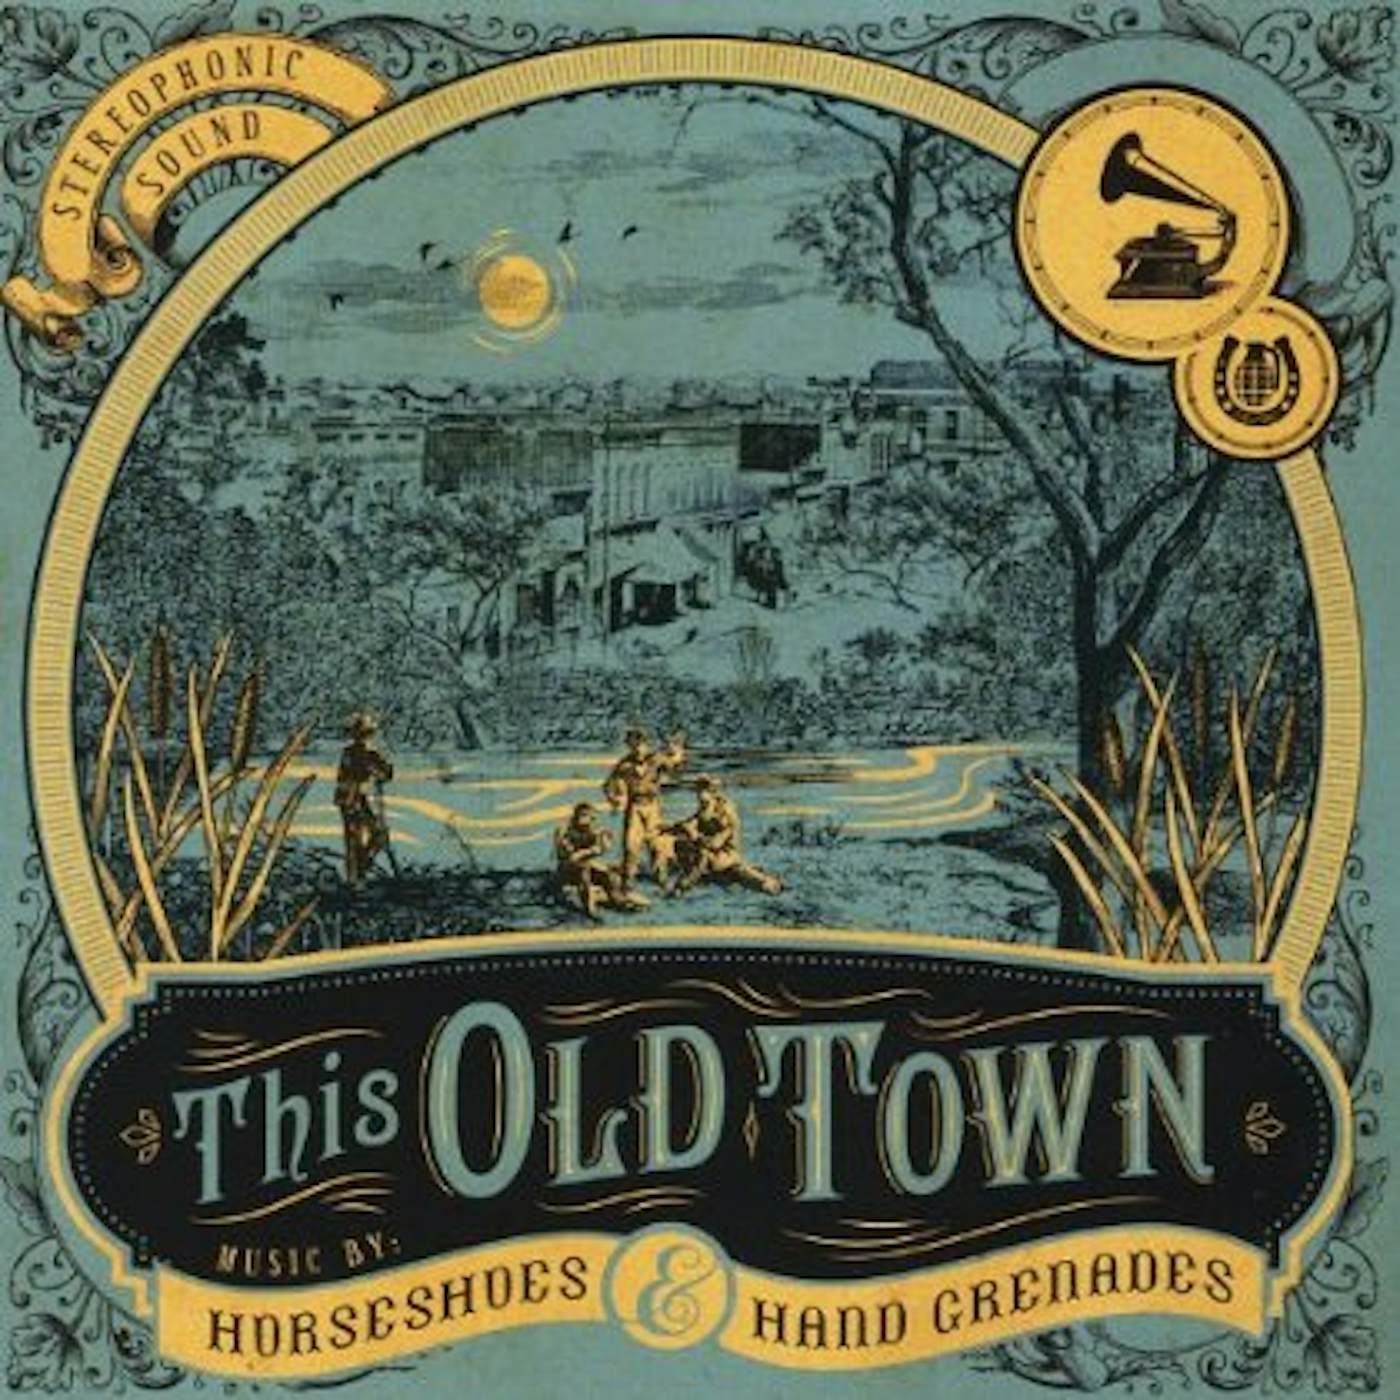 Horseshoes & Hand Grenades THIS OLD TOWN CD